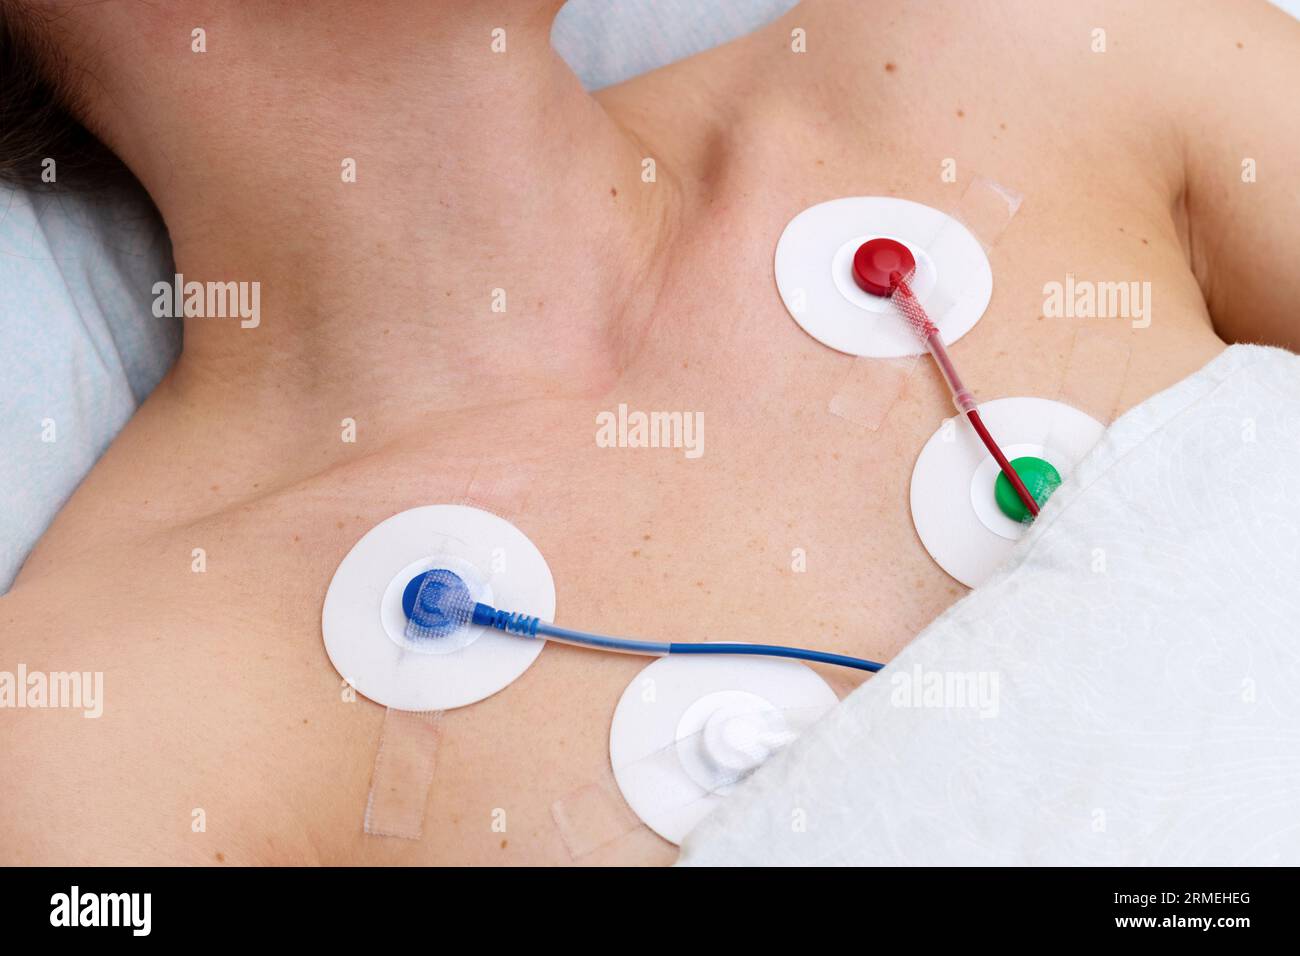 Holter monitoring nobody of patient. Stock Photo